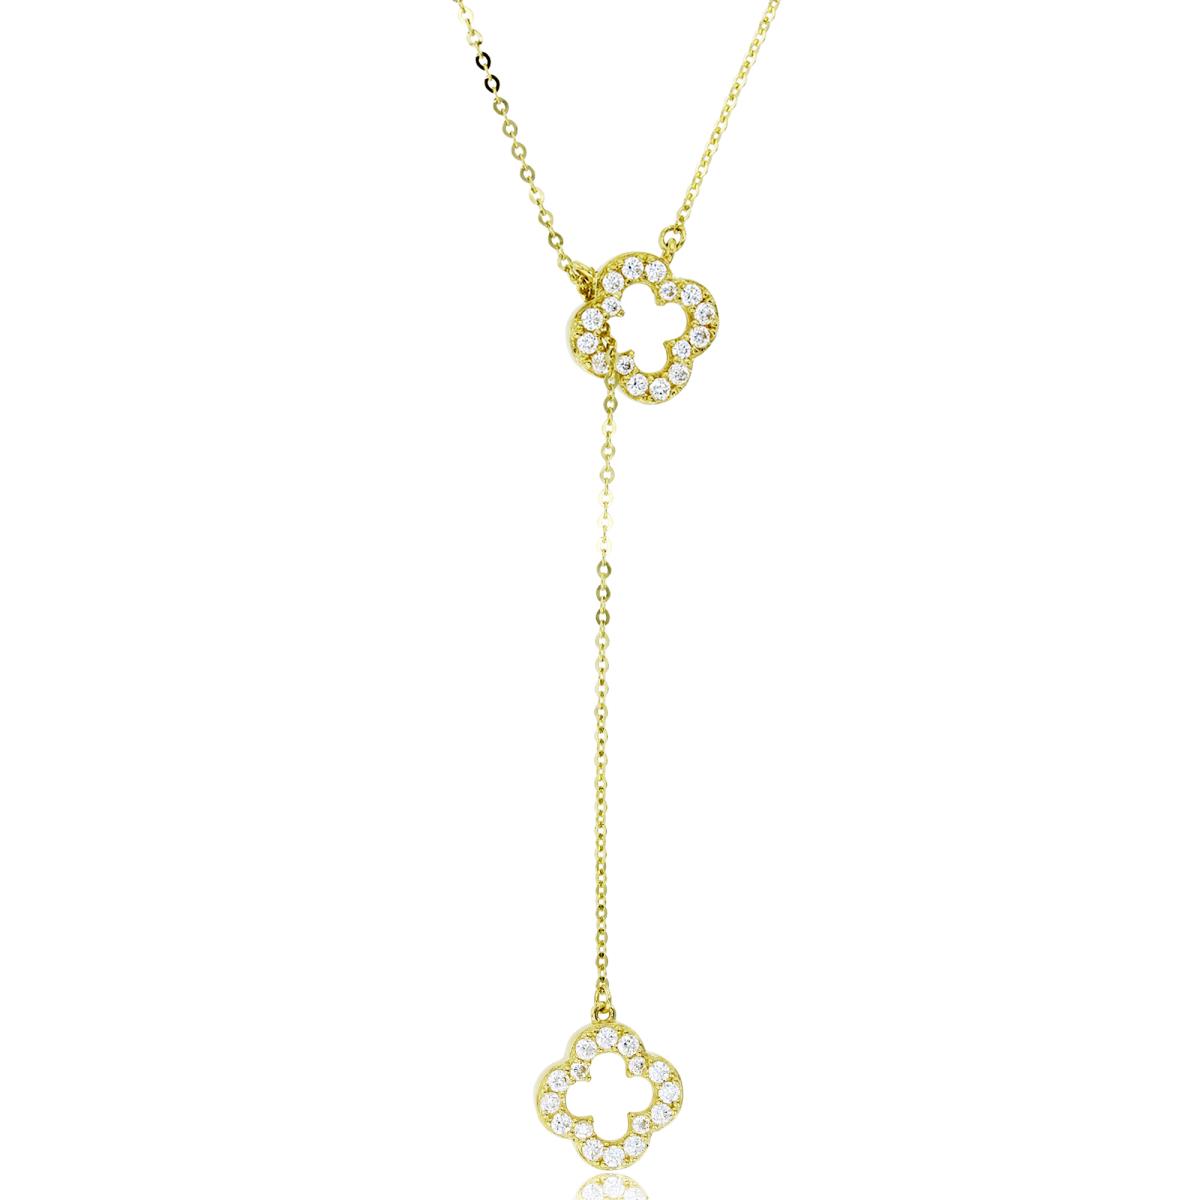 10K Yellow Gold Rnd CZ Double Open Clovers Dangling 17+1"Necklace